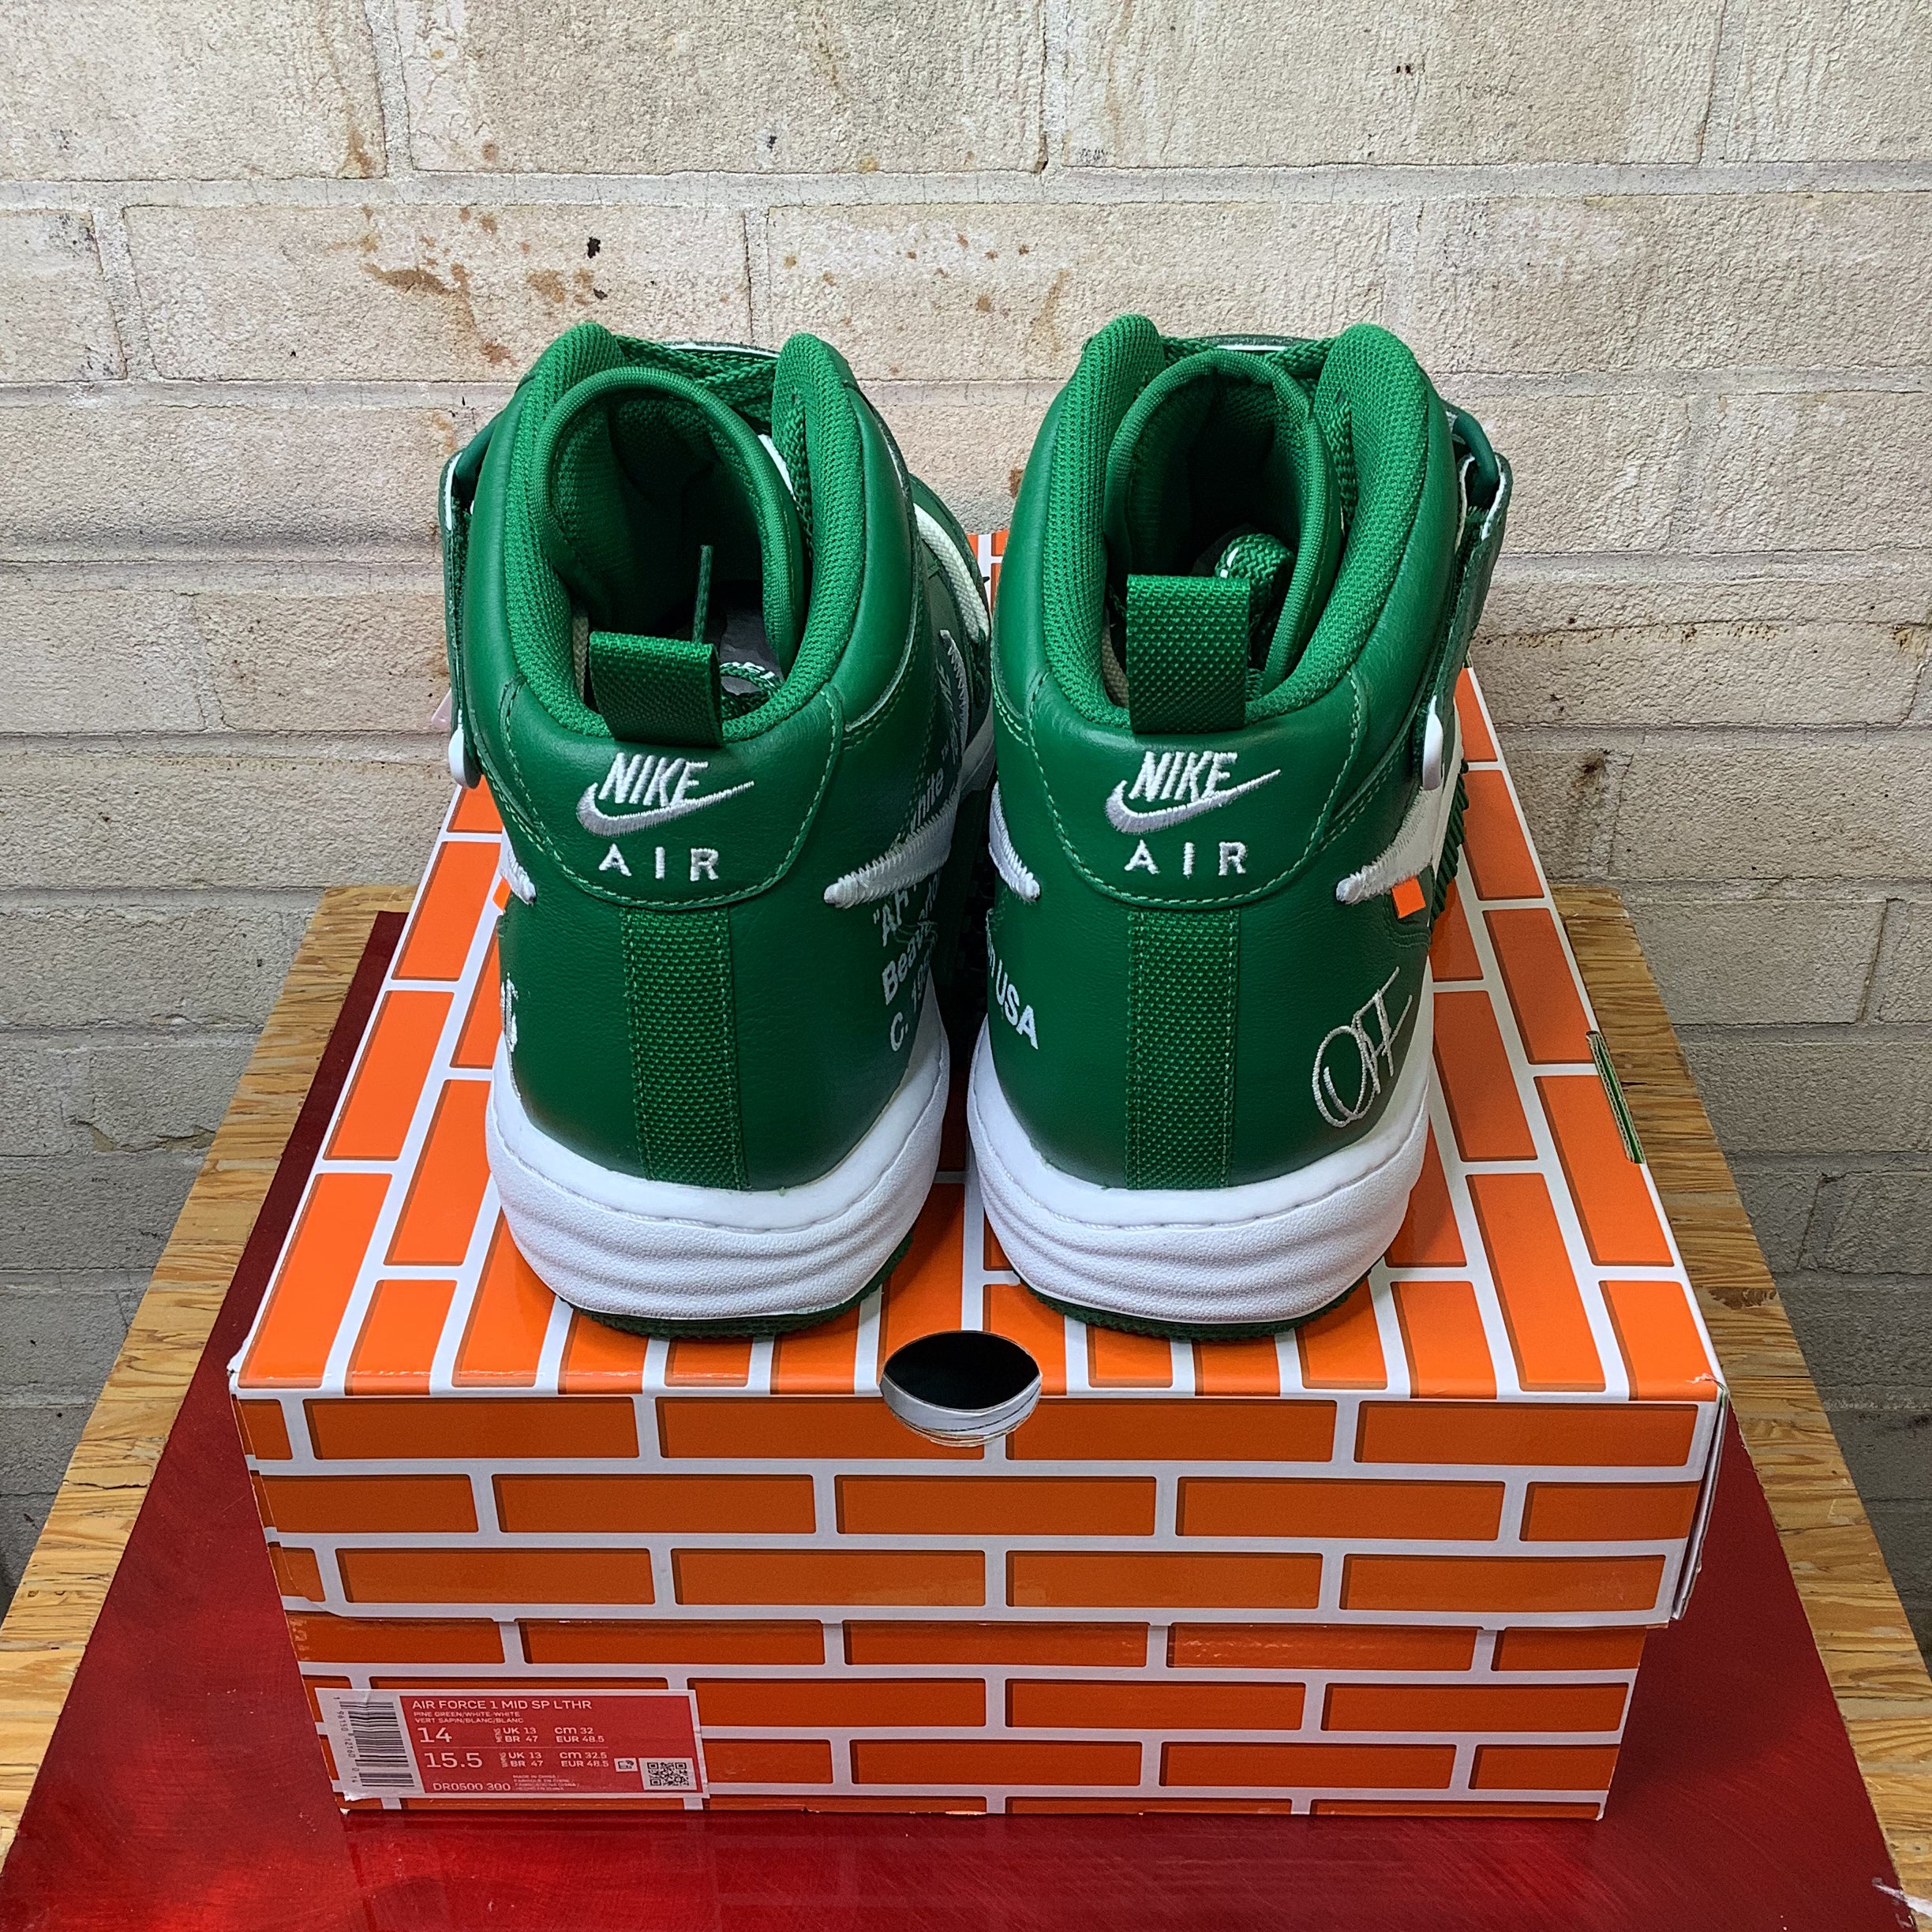 NIKE AIR FORCE 1 MID OFF WHITE PINE GREEN SIZE 14 DR0500-300